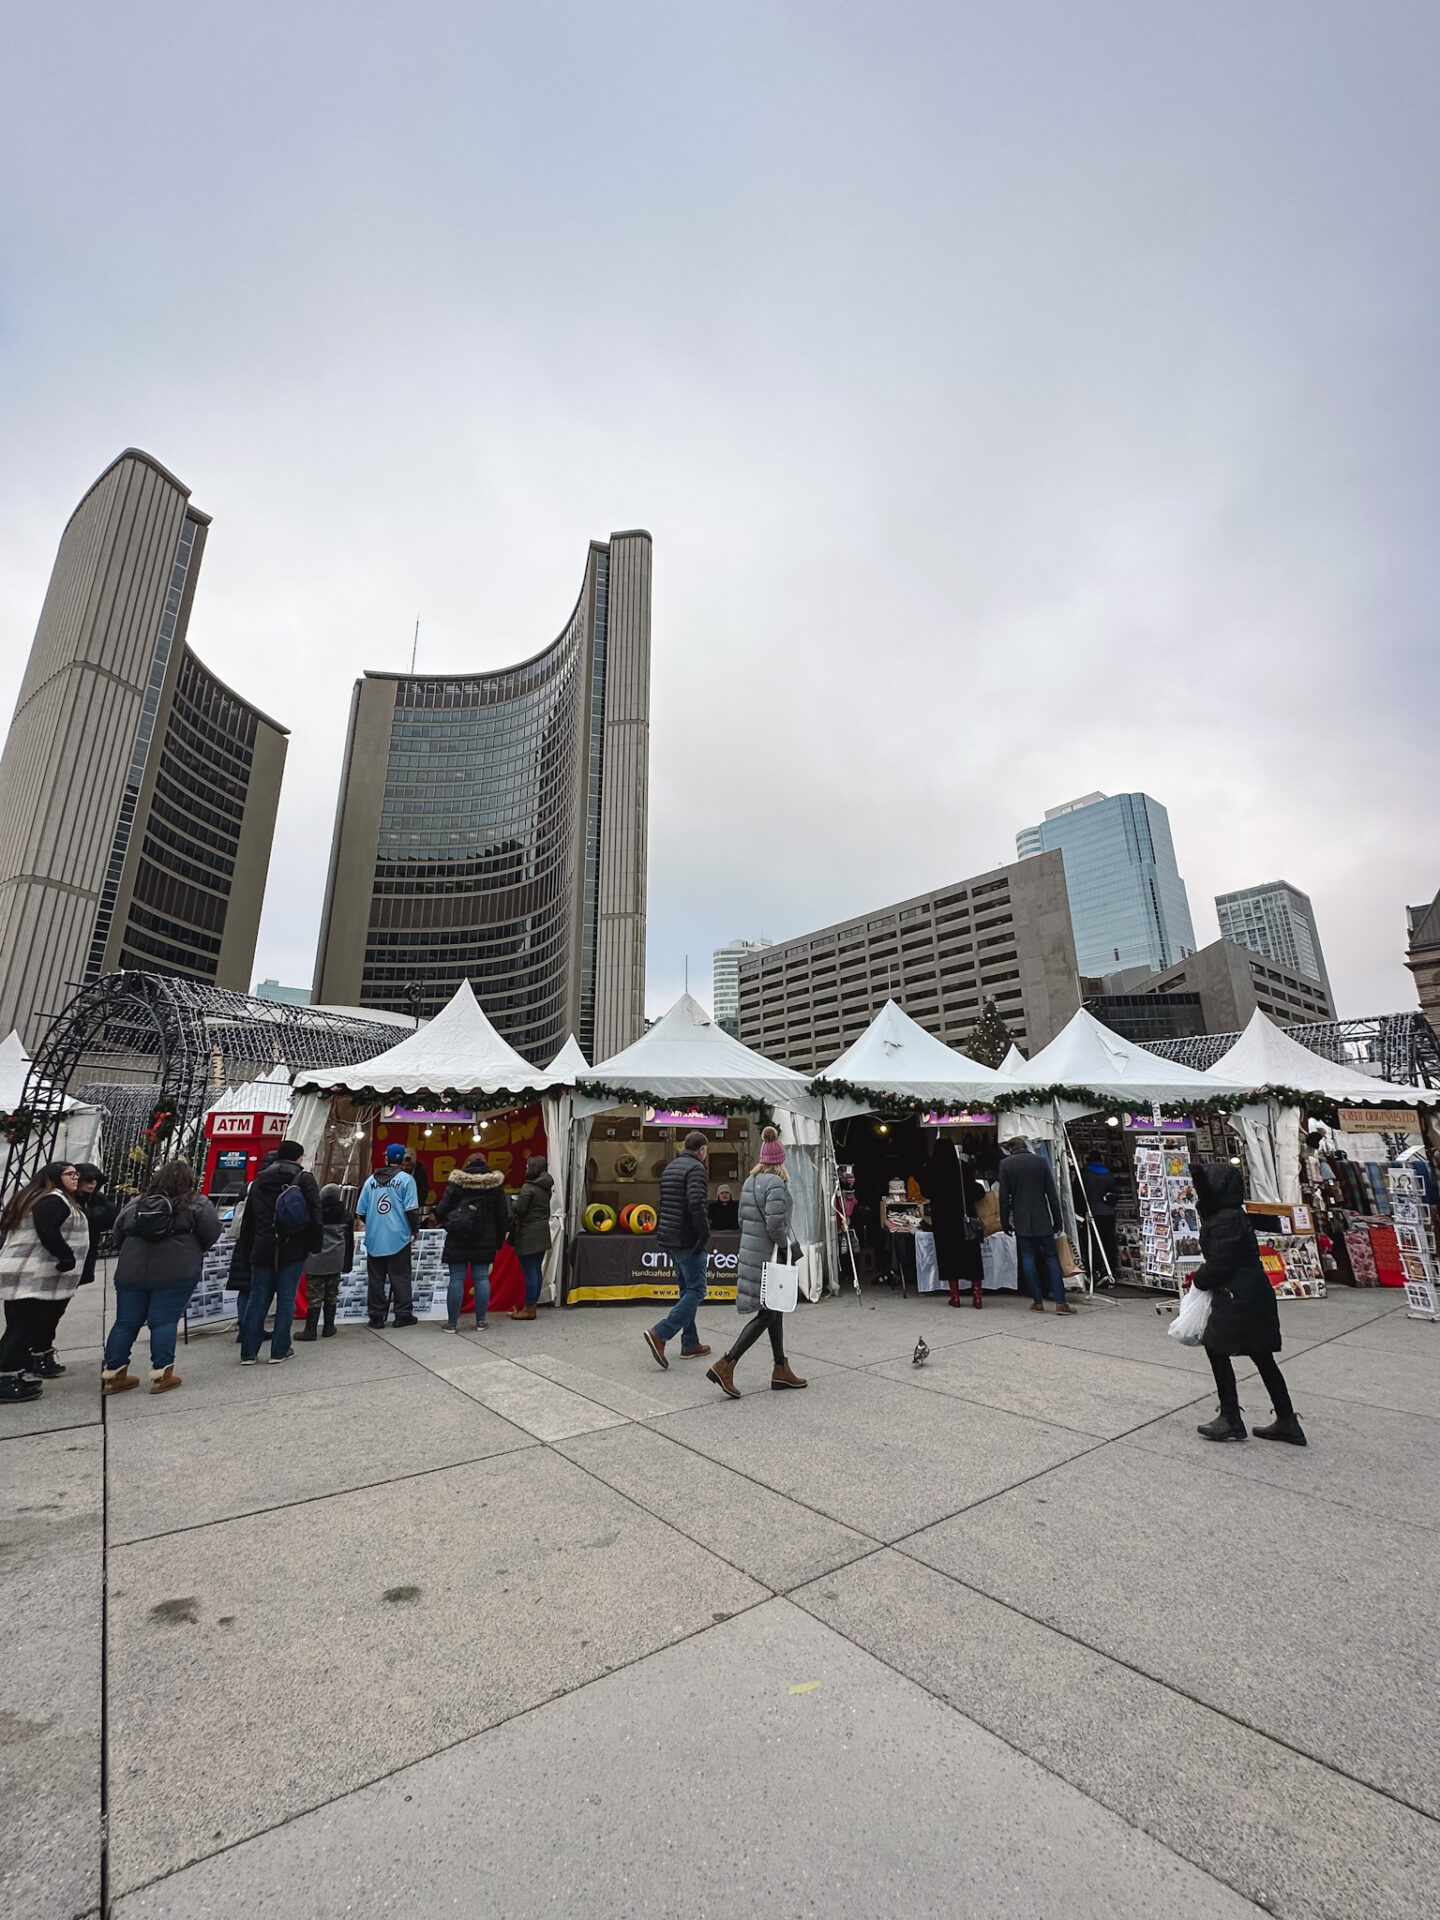 Holiday Fair in the Square at Nathan Phillips Square in Toronto